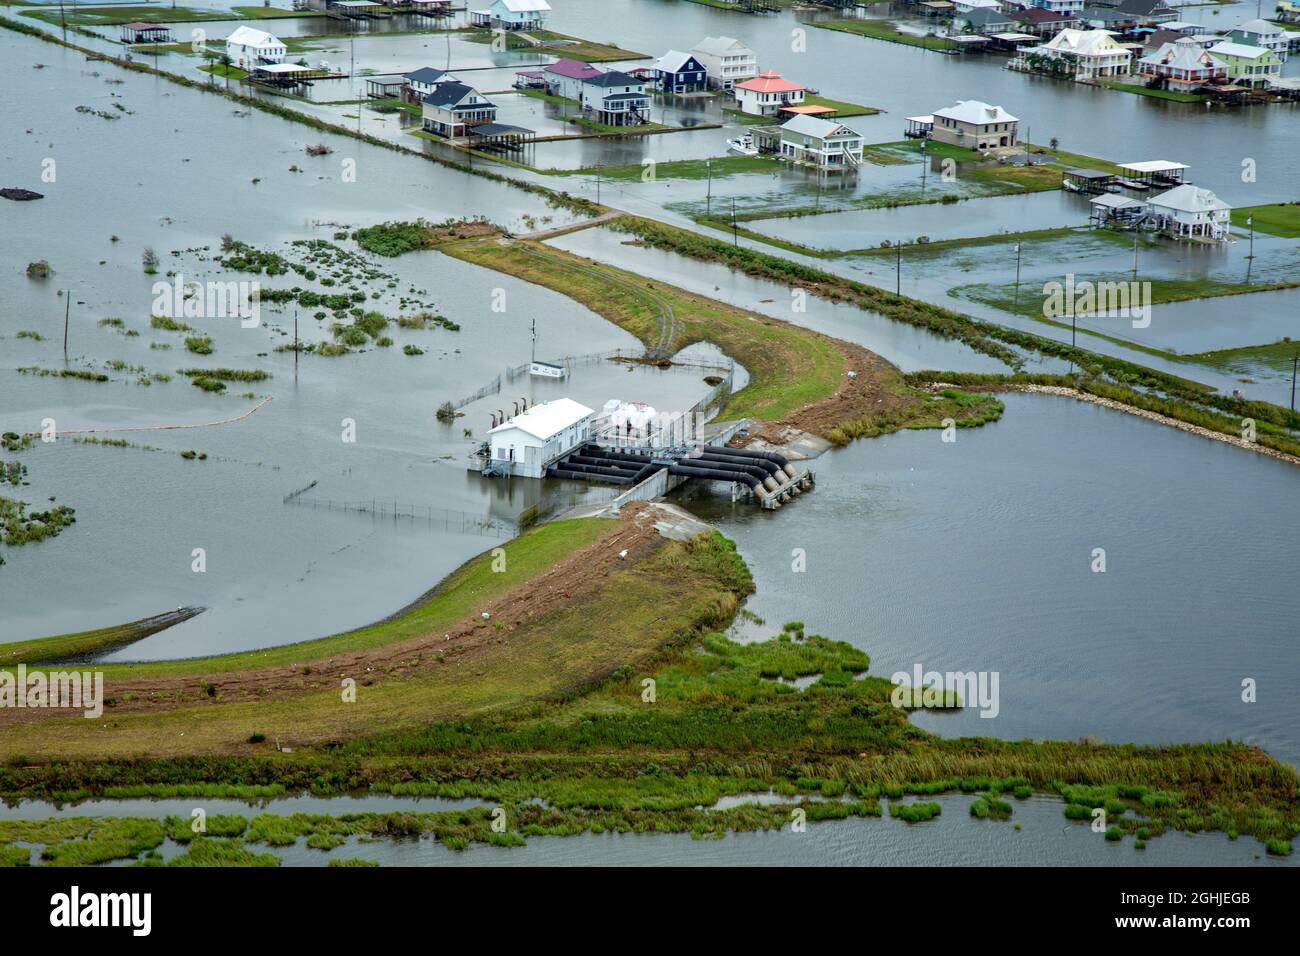 LaPlace, United States of America. 01 September, 2021. Aerial view of the destruction caused by Category 4 Hurricane Ida in St. John the Baptist Parish along the Mississippi Delta September 1, 2021 near LaPlace, Louisiana. Credit: Maj. Grace Geiger/U.S. Army/Alamy Live News Stock Photo